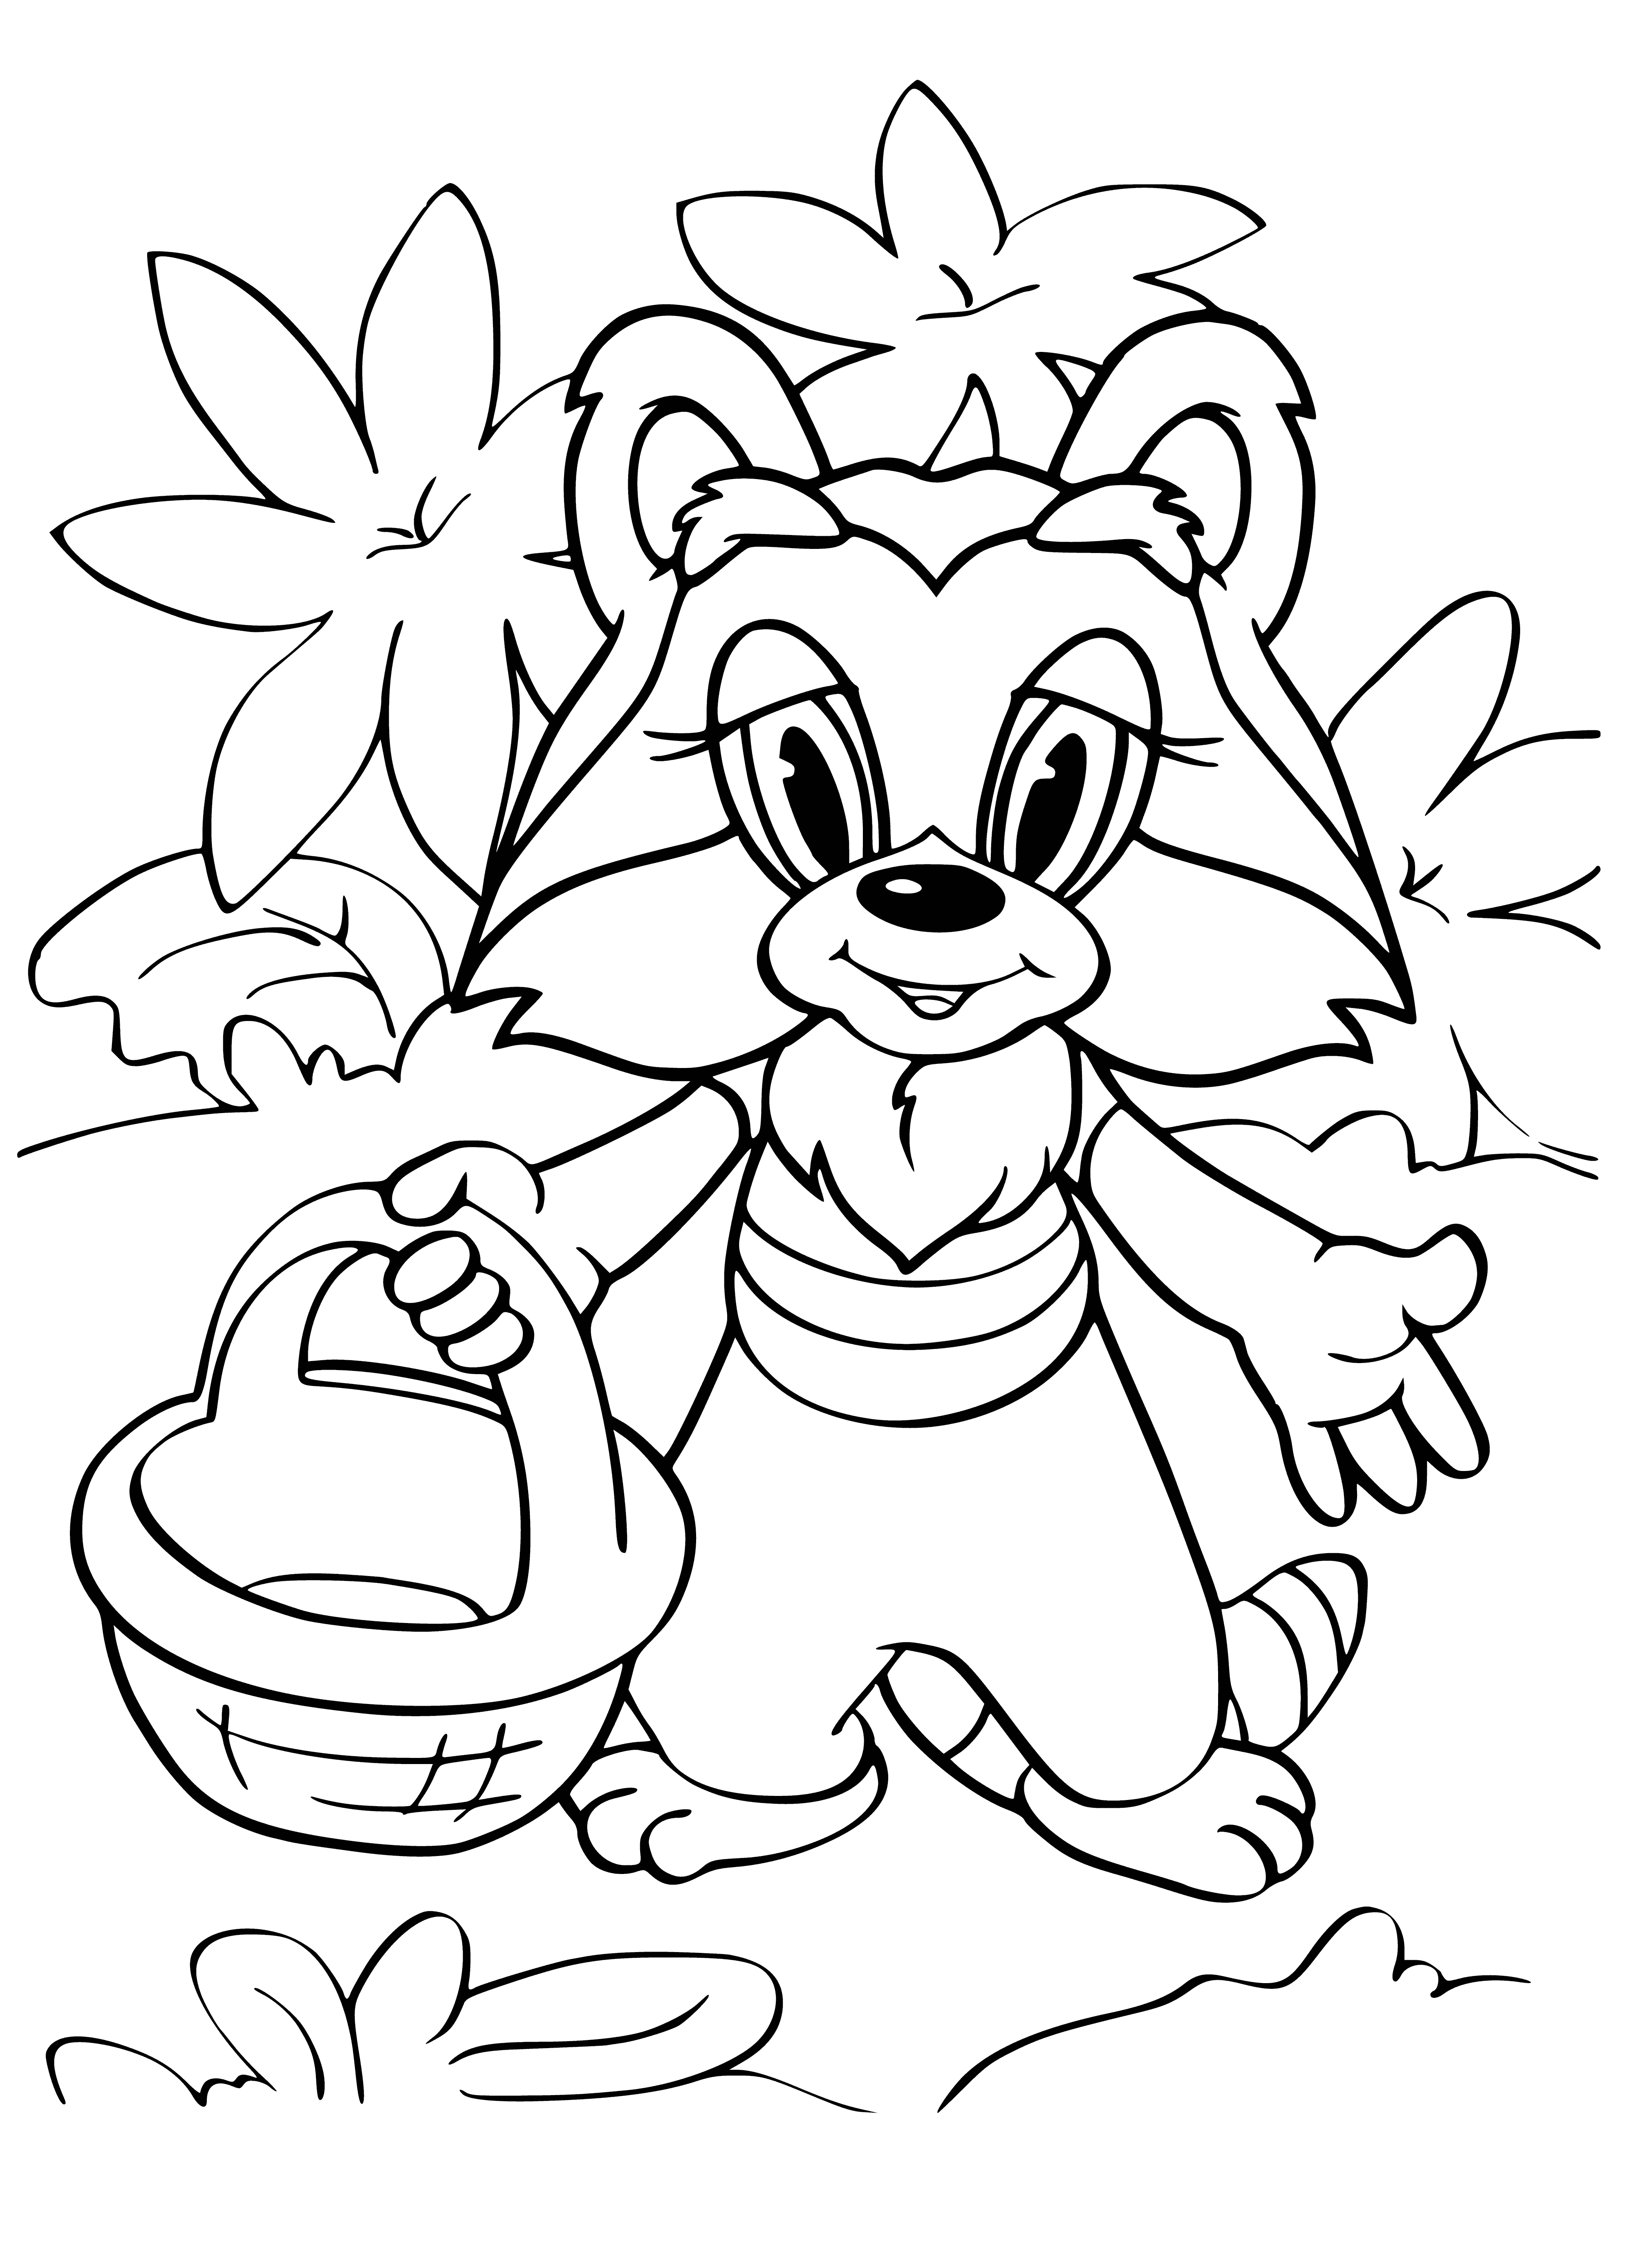 coloring page: Raccoon w/basket, blue bow, looks in basket, surprises await!